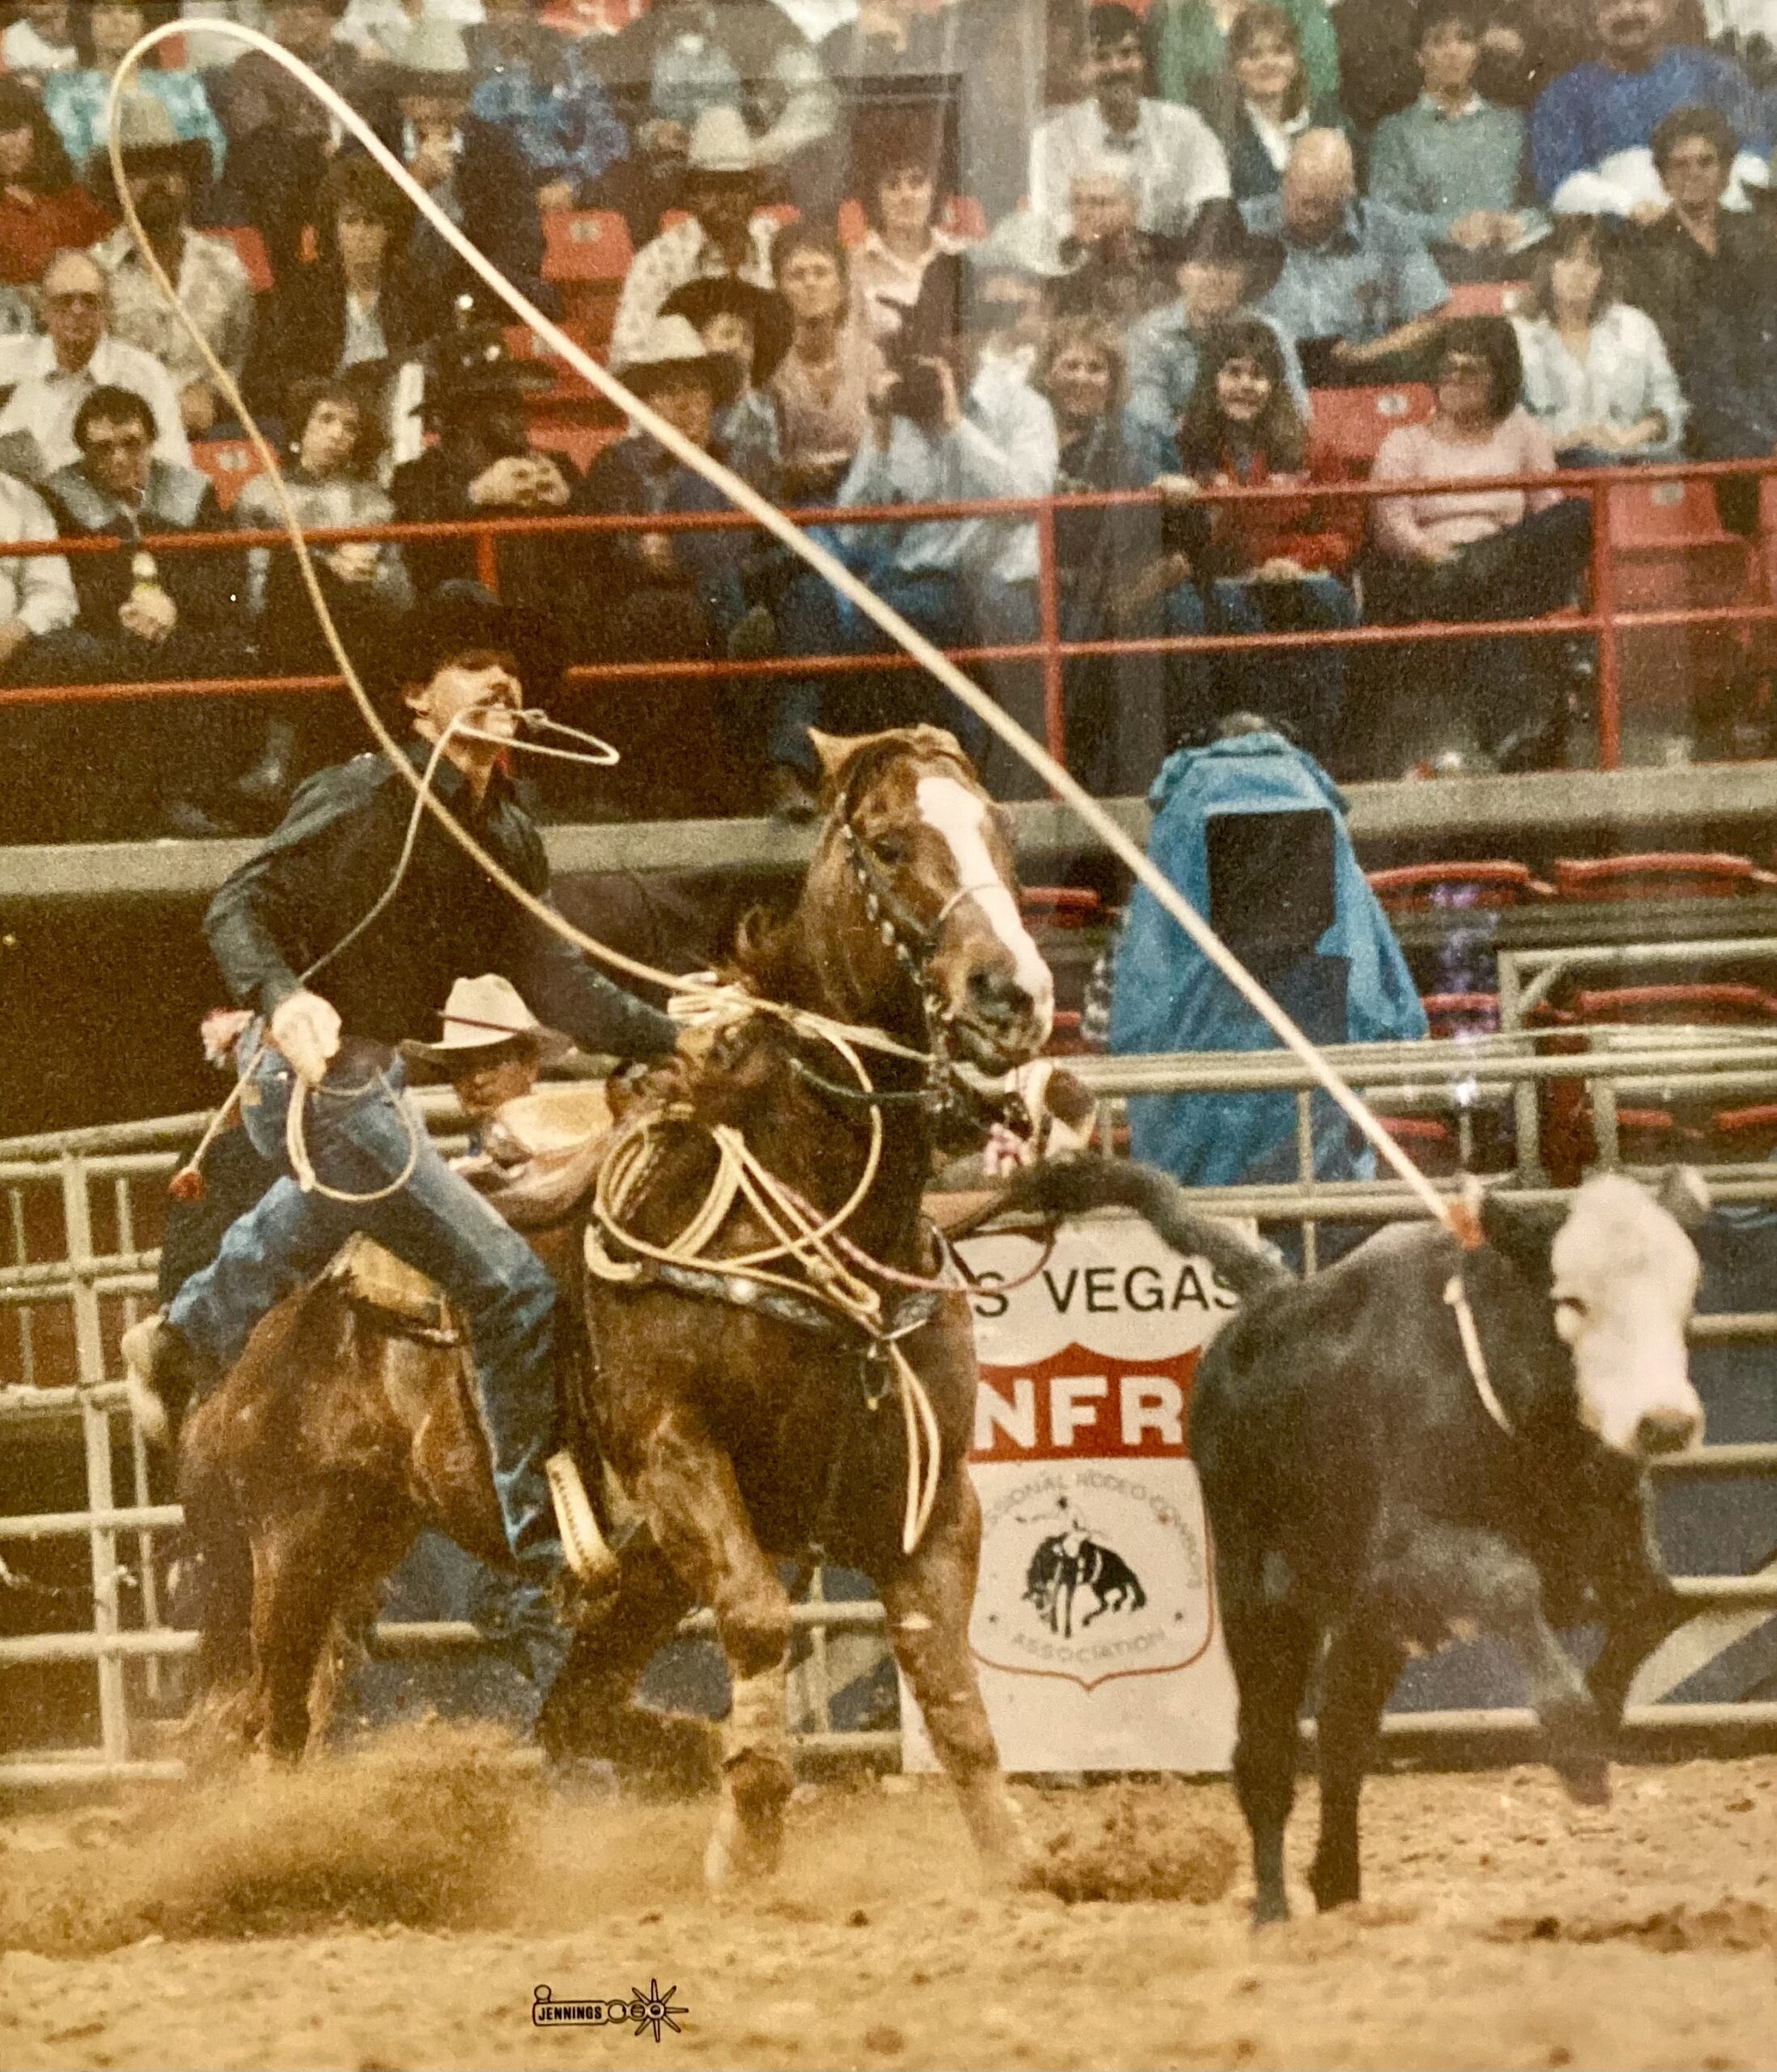 Neal Felton roping at his first NFR in 1986 on the Kyle family’s horse Crawford.